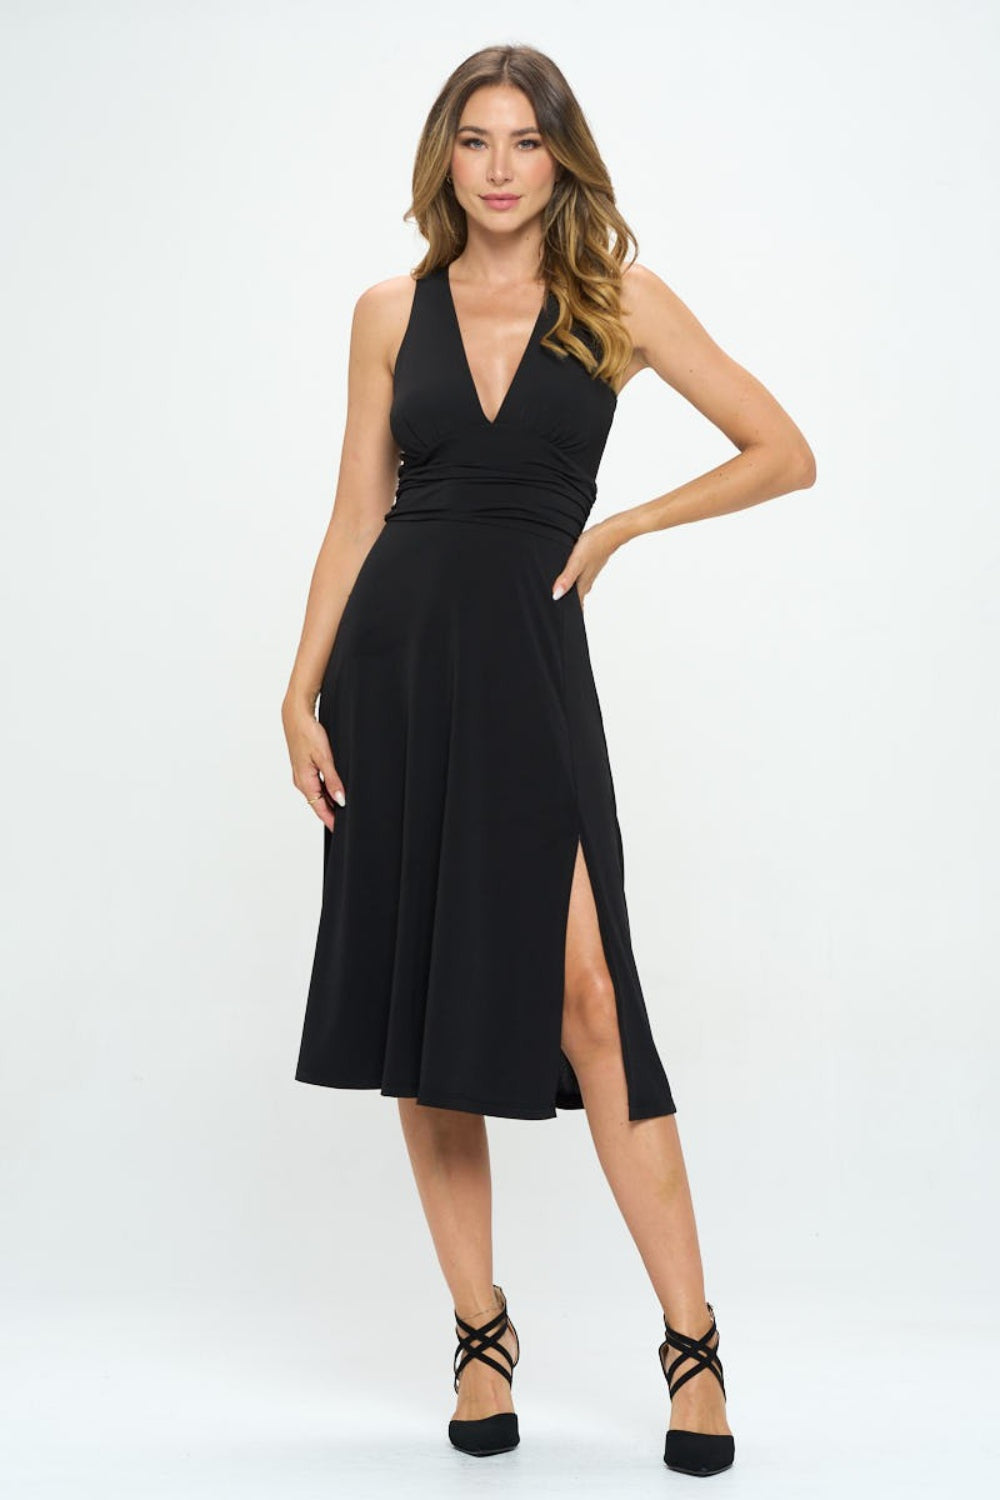 This ruched waist sleeveless slit dress is a stunning and versatile piece for any occasion. The ruched waist detailing creates a flattering silhouette by accentuating your curves. The sleeveless design is perfect for warmer weather, while the slit adds a touch of allure and movement.